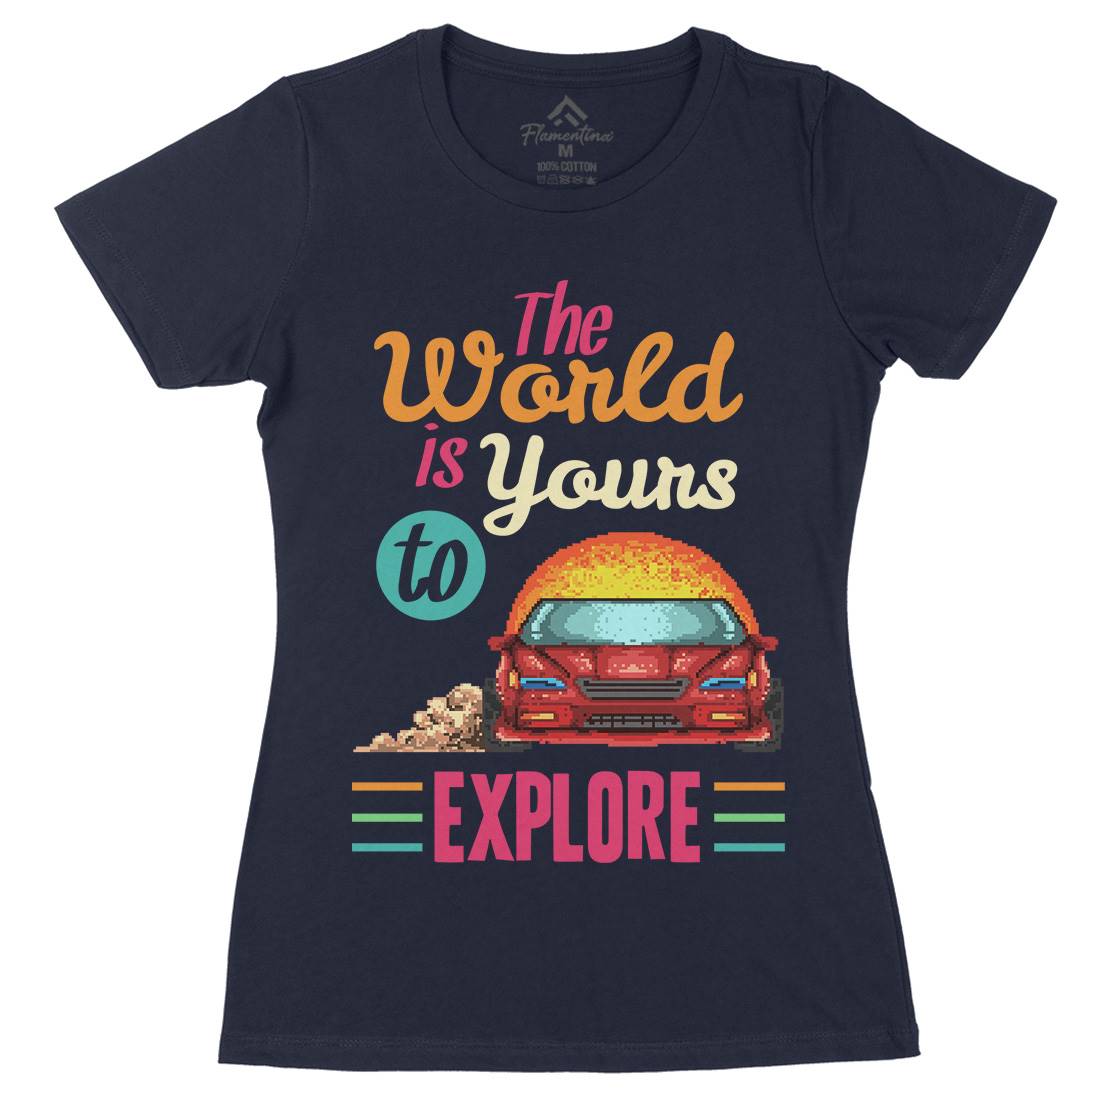 The World Is Yours To Explore Womens Organic Crew Neck T-Shirt Cars B970